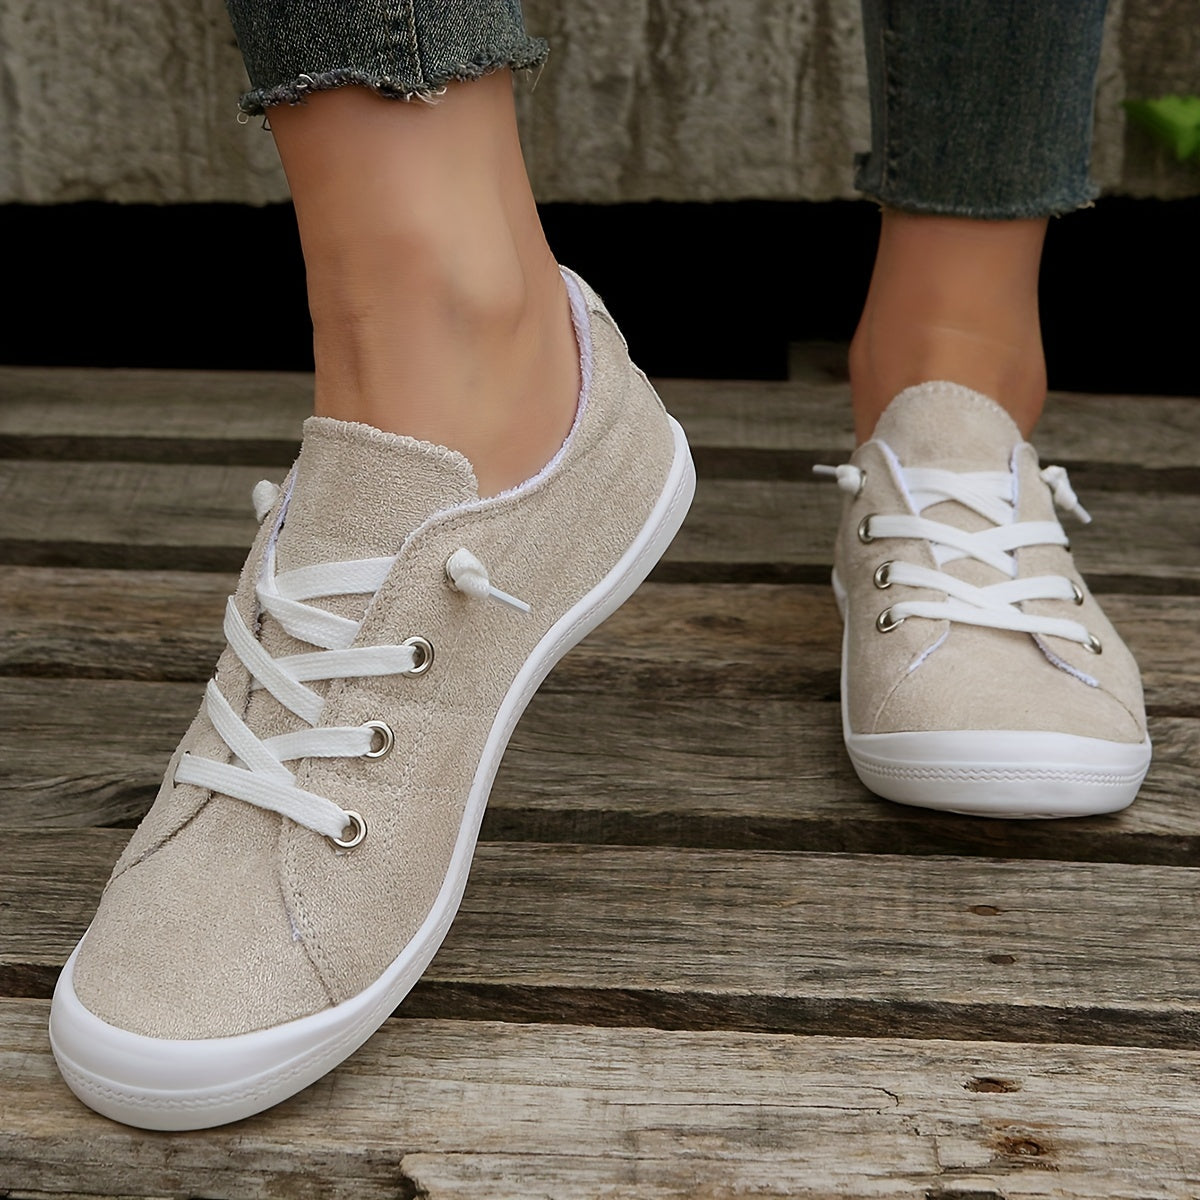 Women's Solid Color Flat Canvas Shoes, Casual & Lightweight  Lace Up Sneakers, Women's All-Match Outdoor Shoes